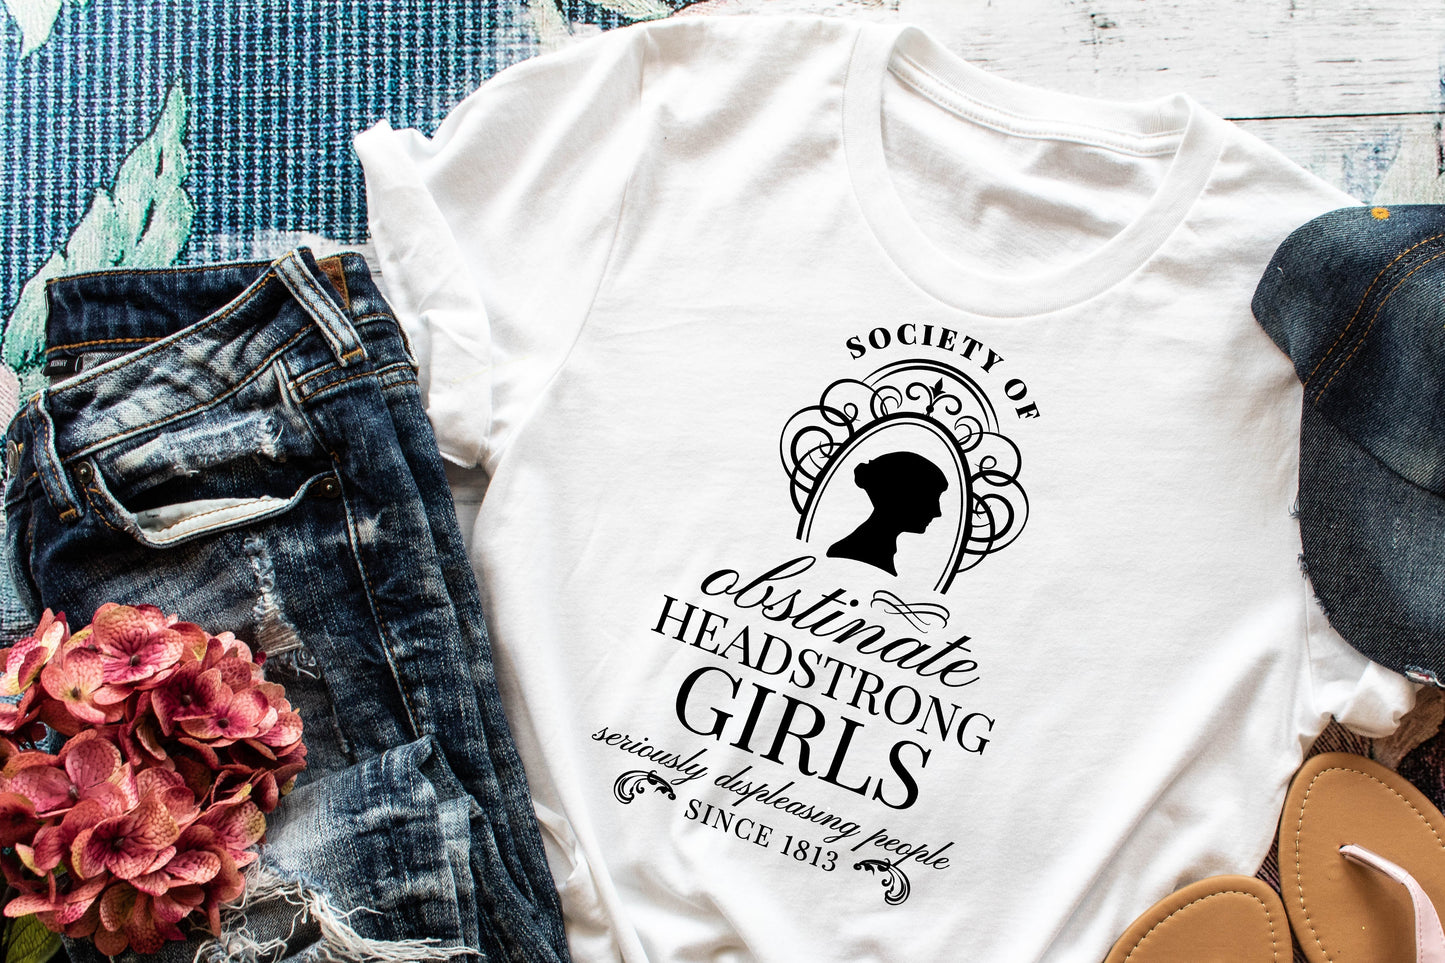 Sassy: Society of Obstinate Headstrong Girls